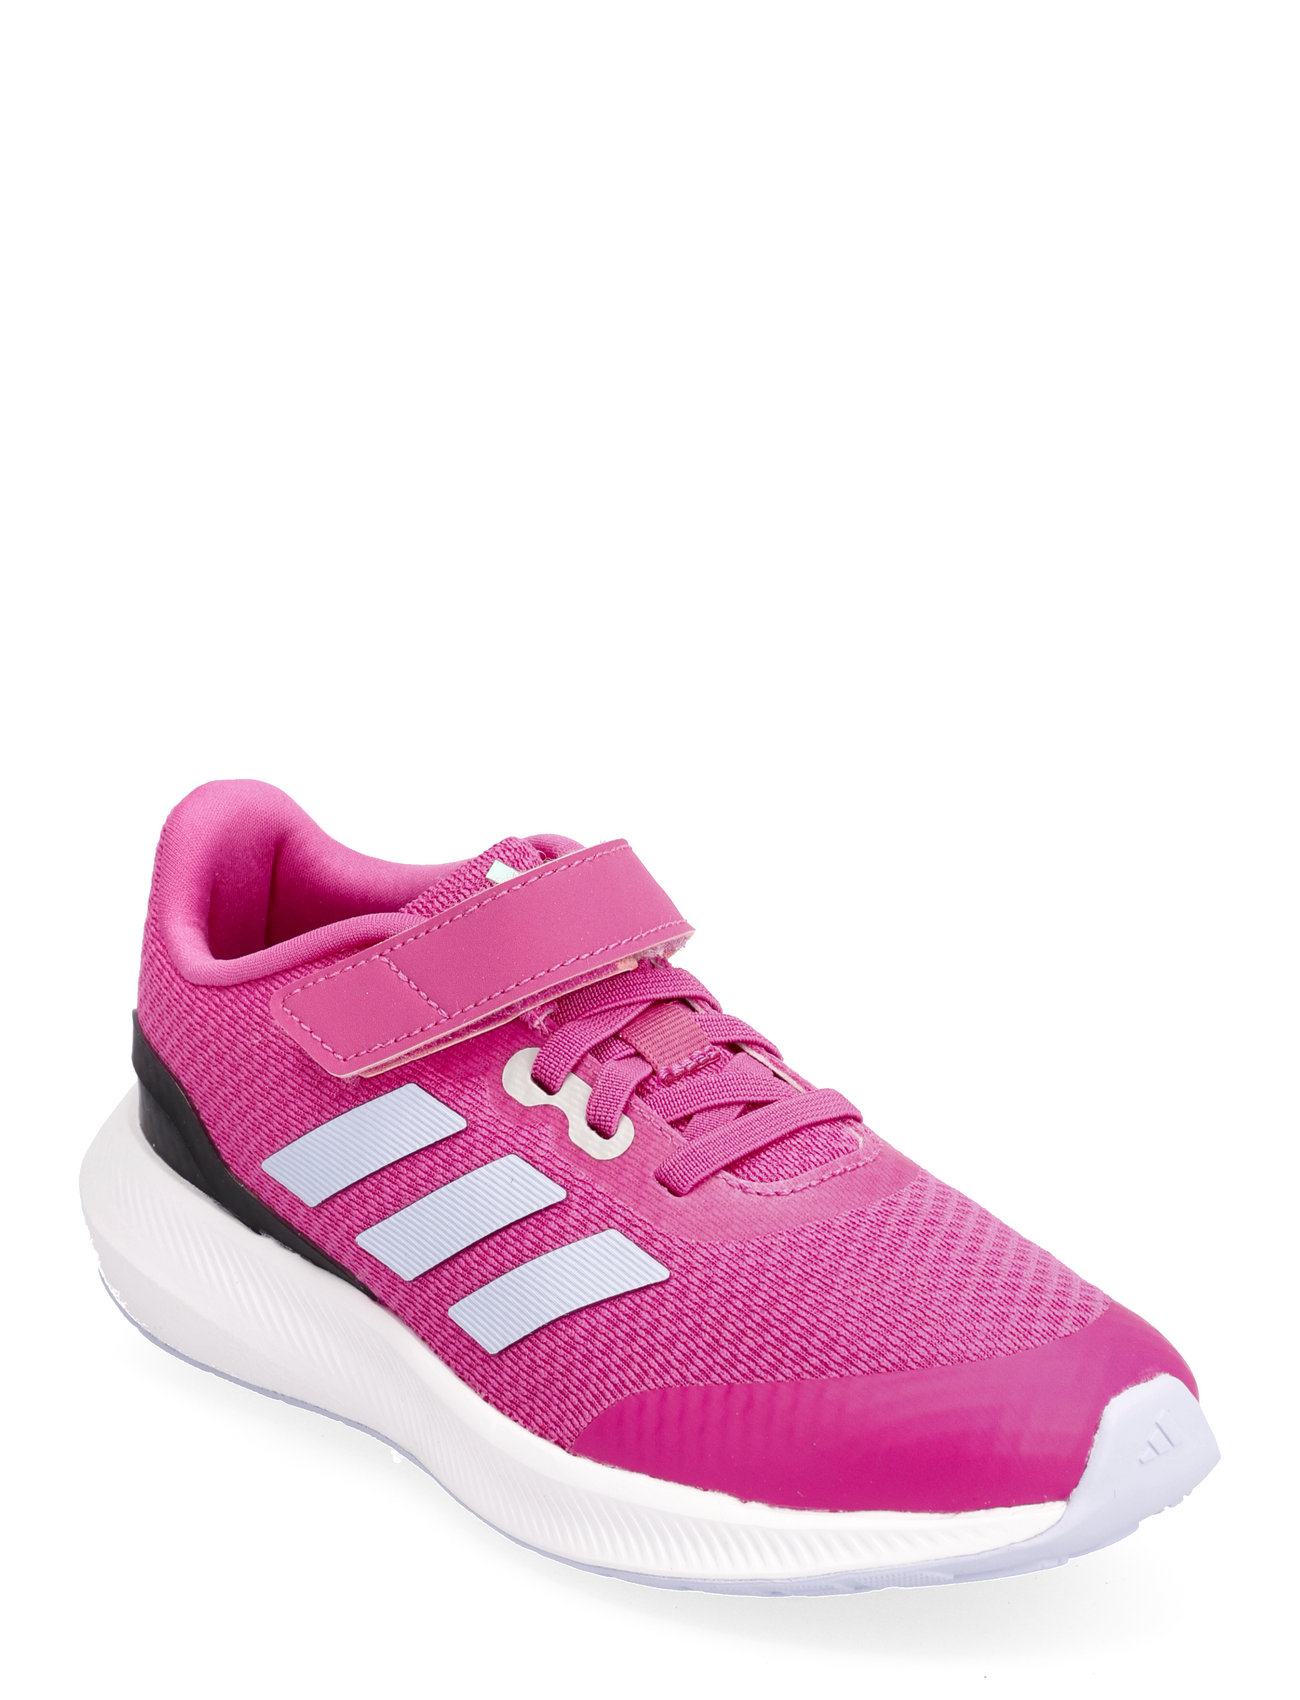 adidas Elastic Shoes Runfalcon Strap Top - 3.0 Sportswear Sneakers Lace